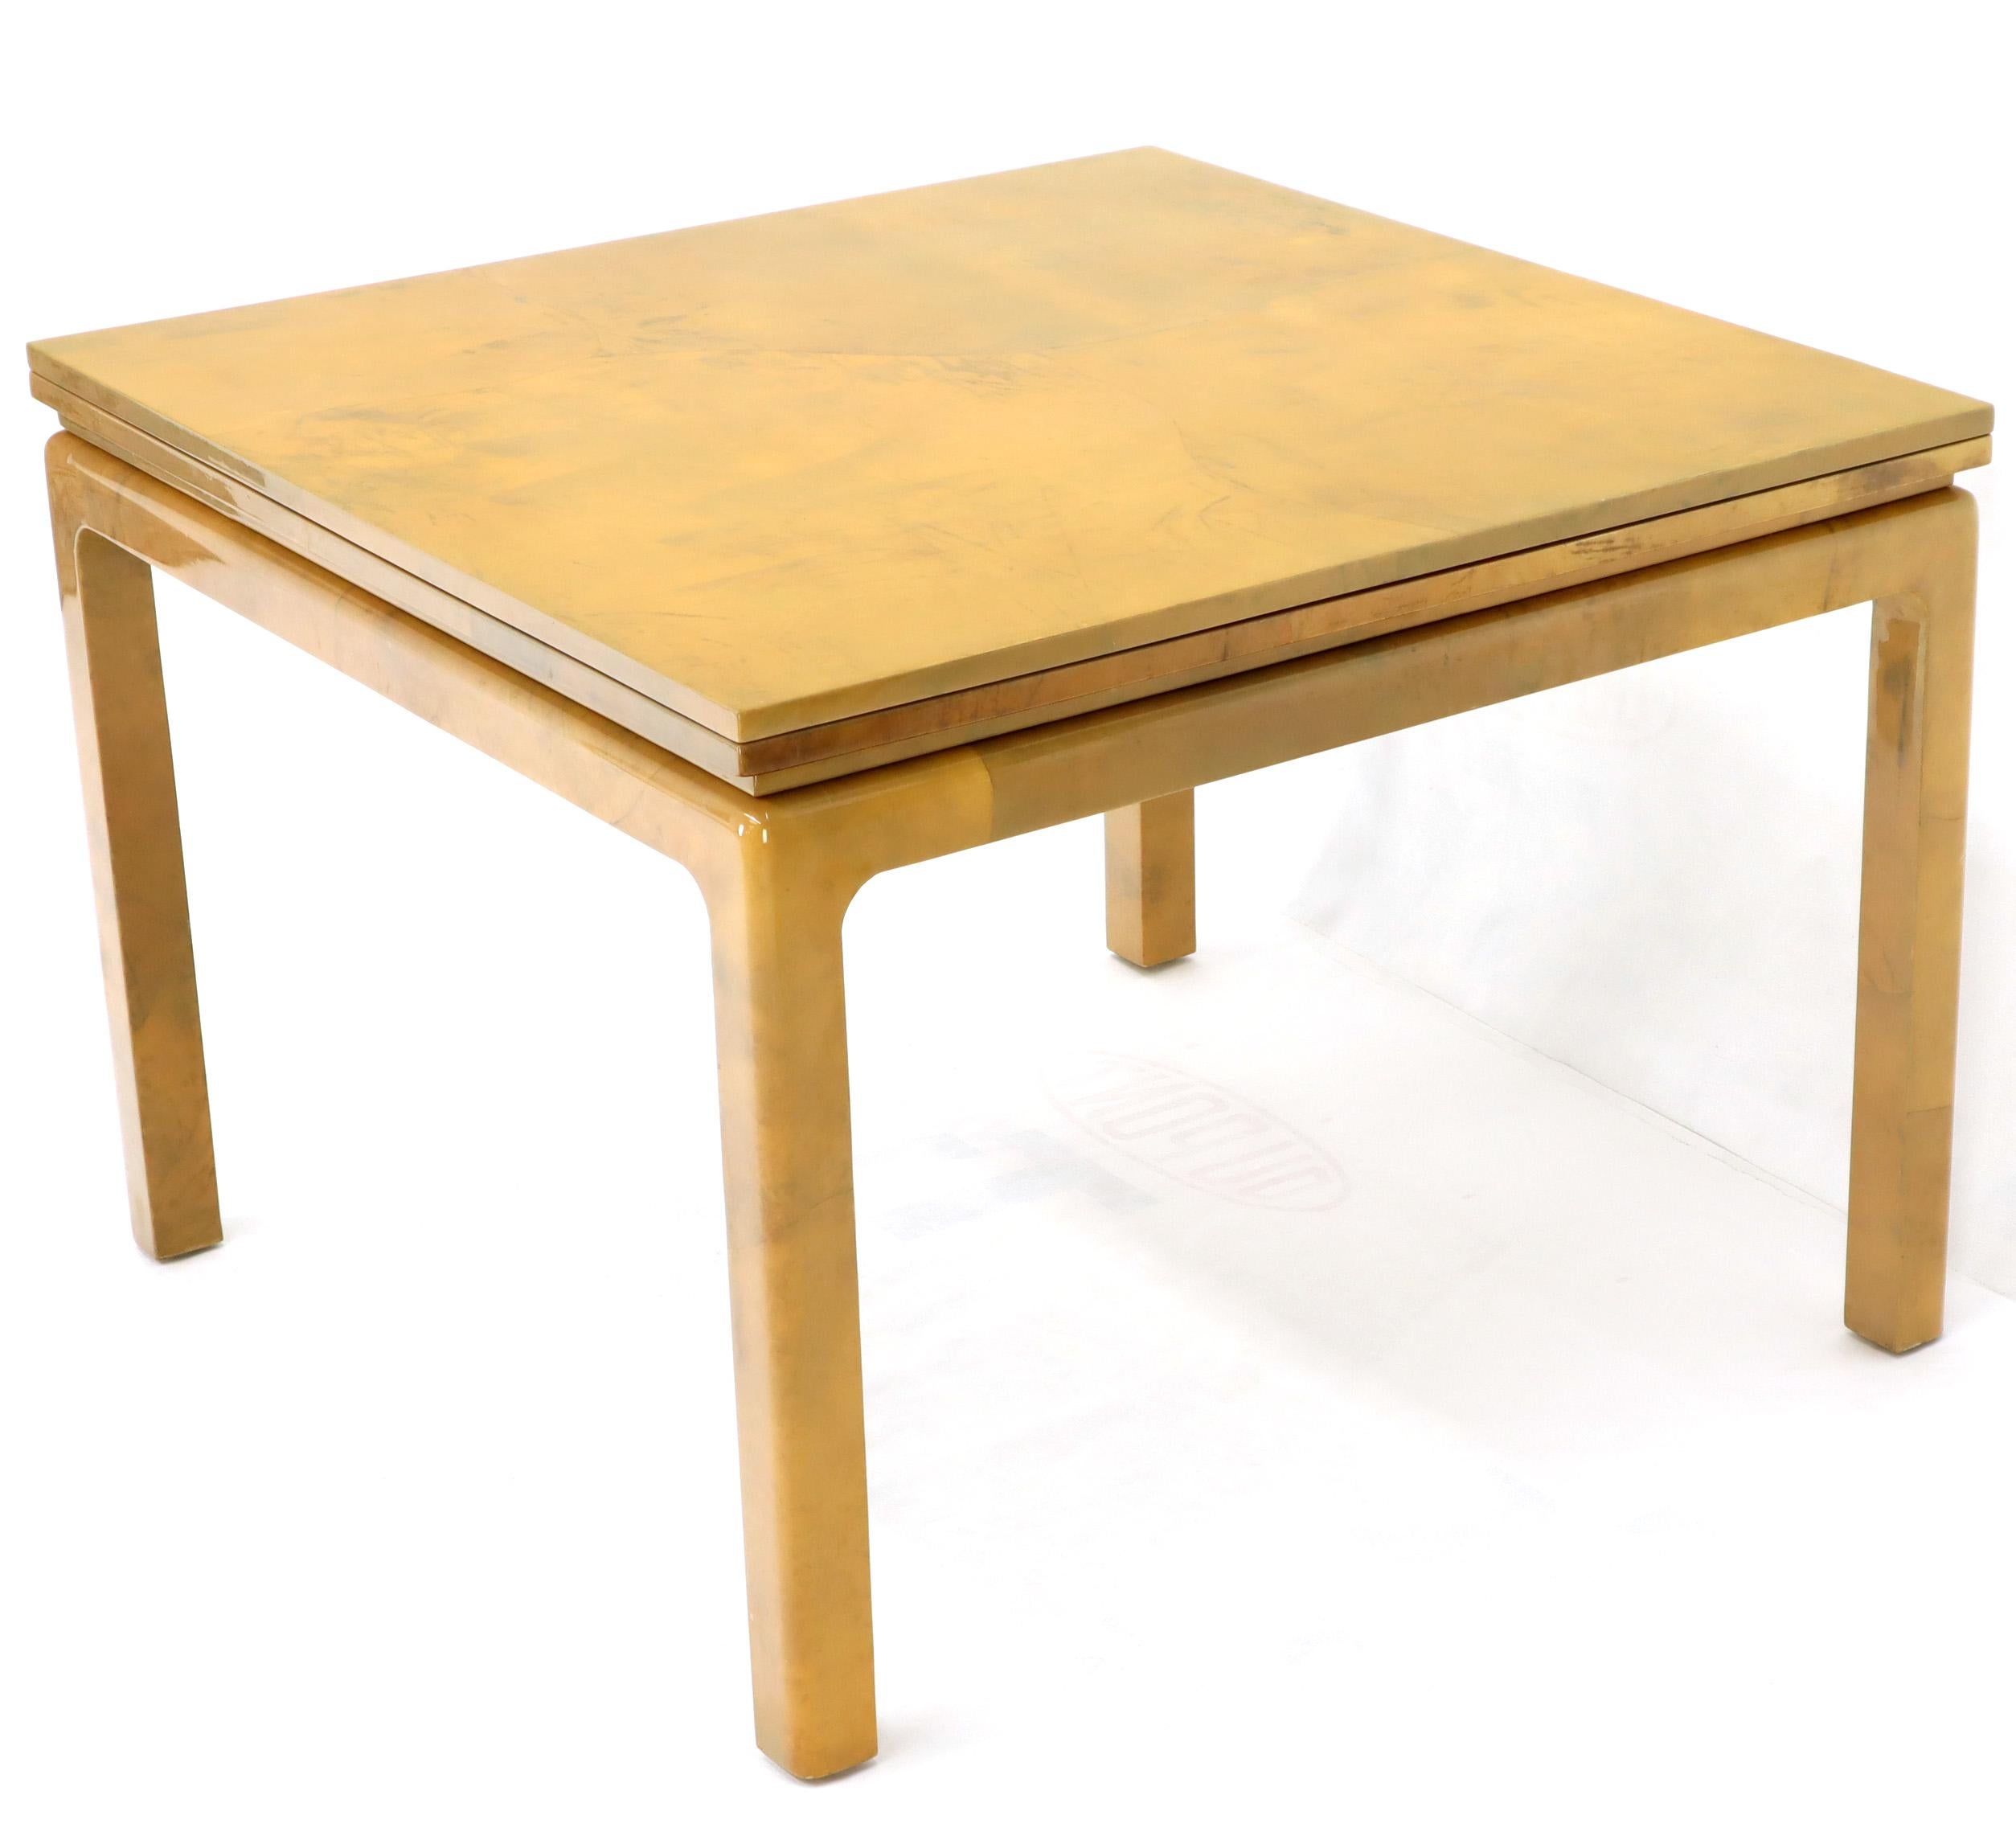 Lacqured GoatSkin Parchment Square Flip Top Dining Table  9